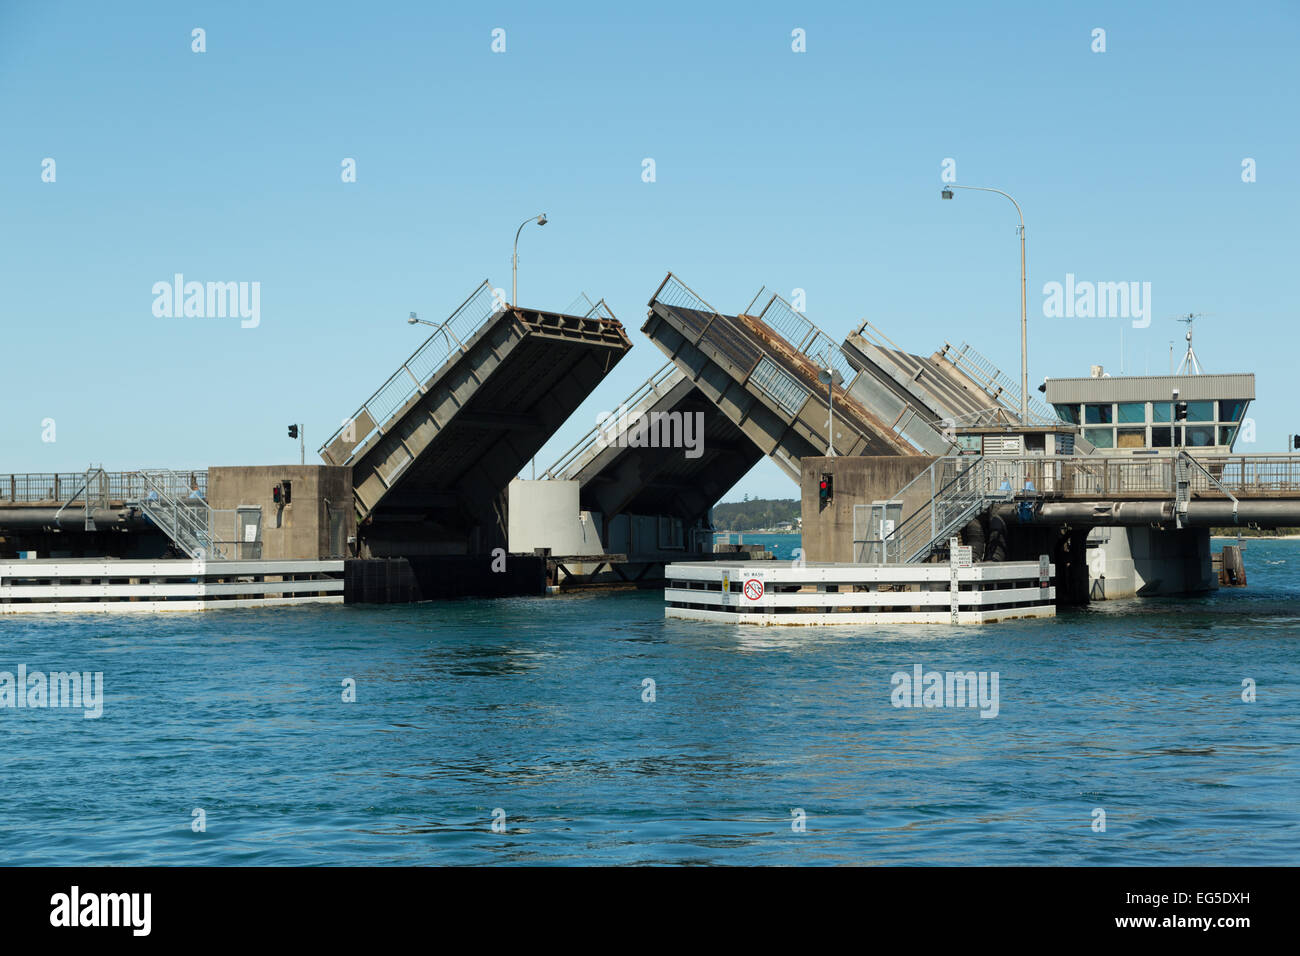 A photograph of the twin opening bridge at Swansea, Newcastle, Australia. The bridges are in a half open position. Stock Photo